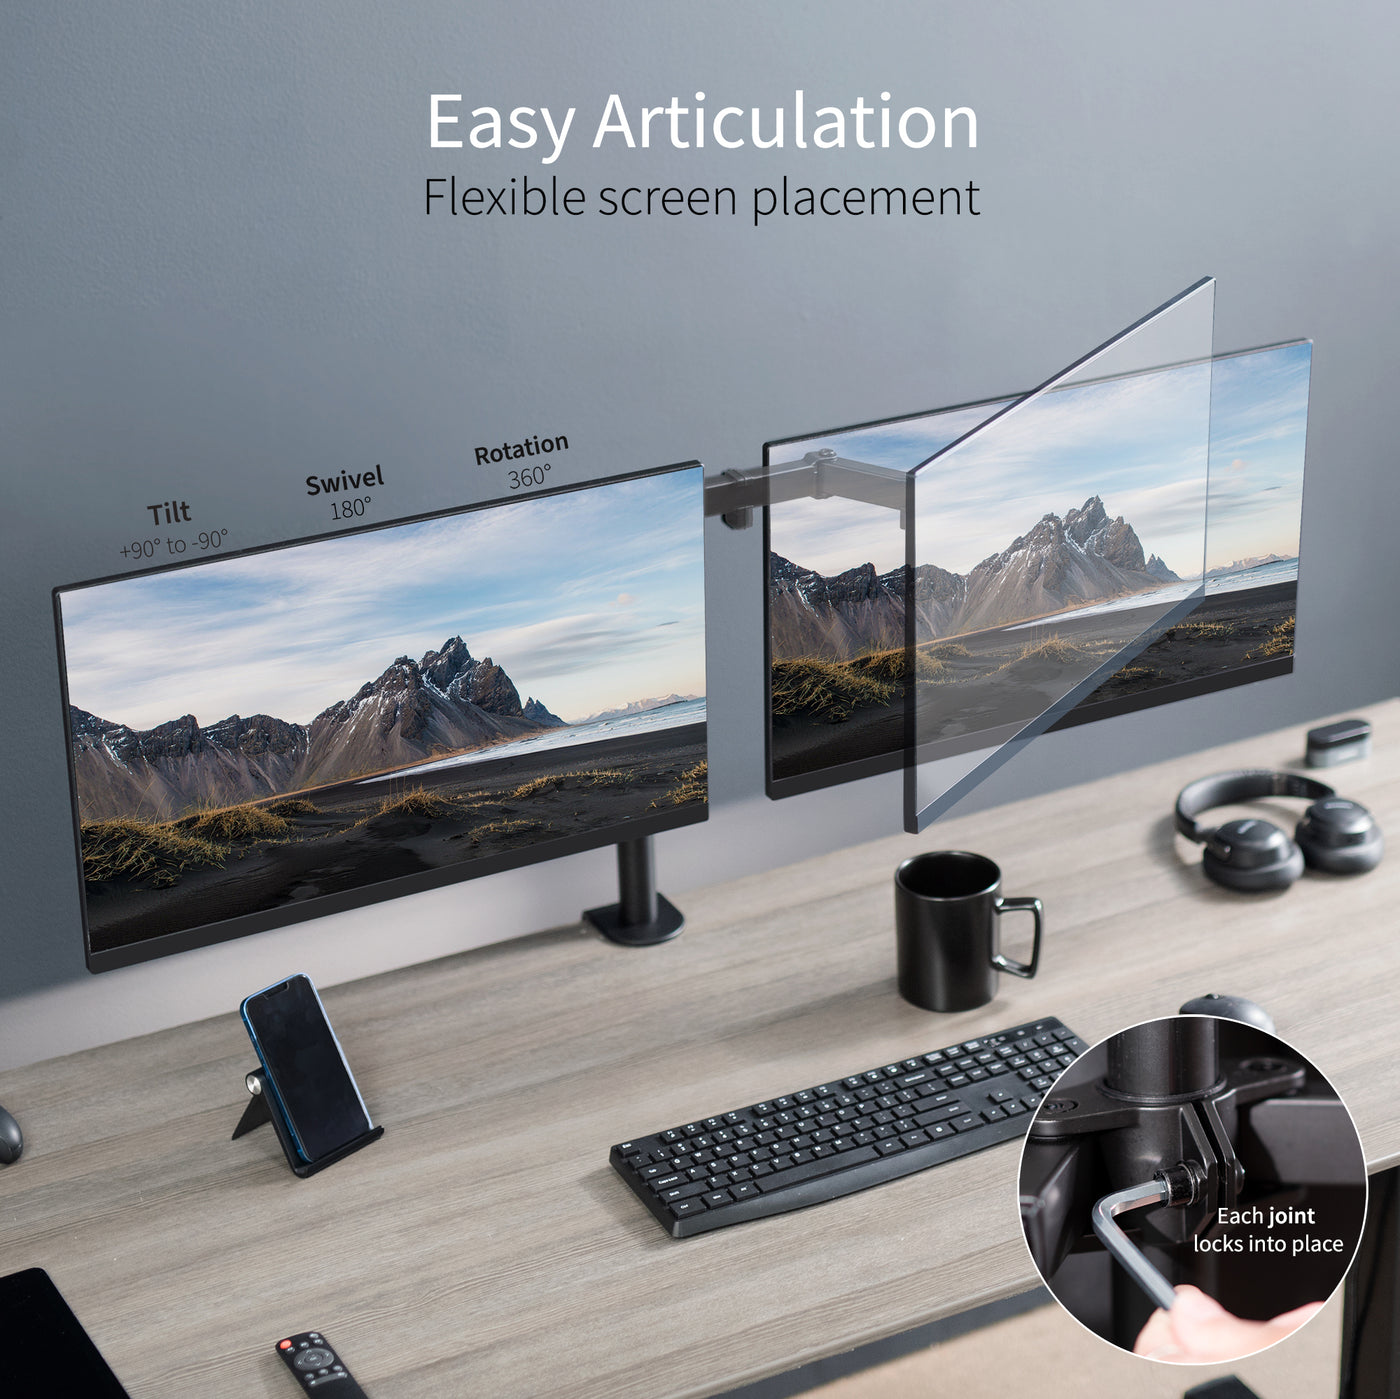 Dual monitor mount with universal VESA patterns and grommet clamp features easy screen articulation for comfortable viewing.